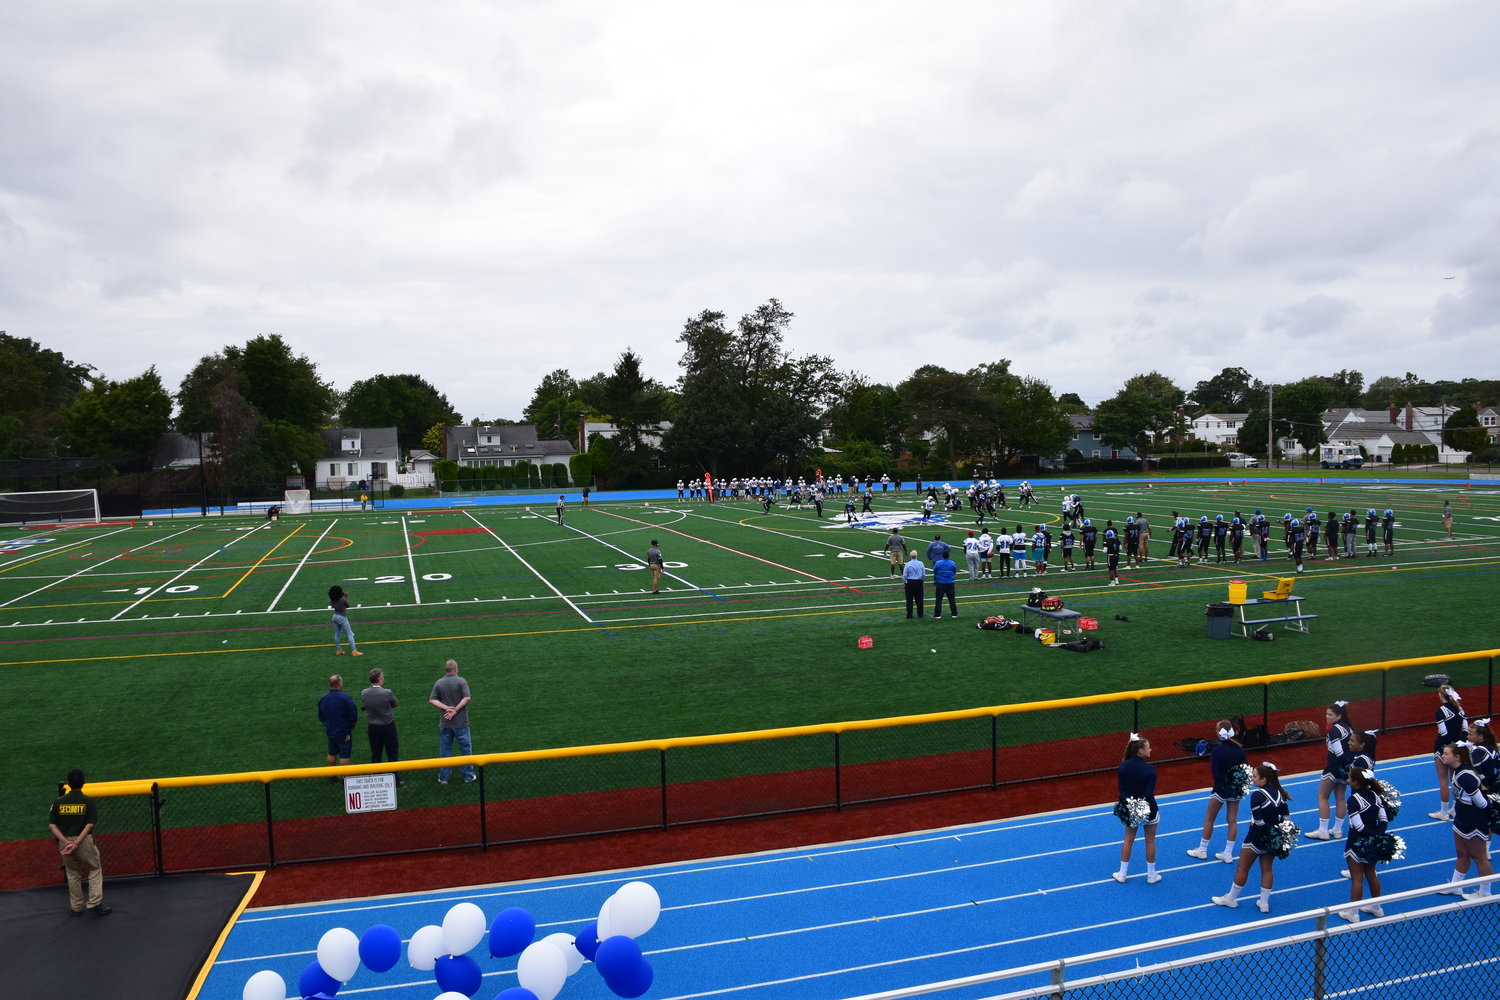 The Central High School District unveiled three new artificial-turf fields last September. The $8 million project was funded by a $41 million bond approved in 2016.